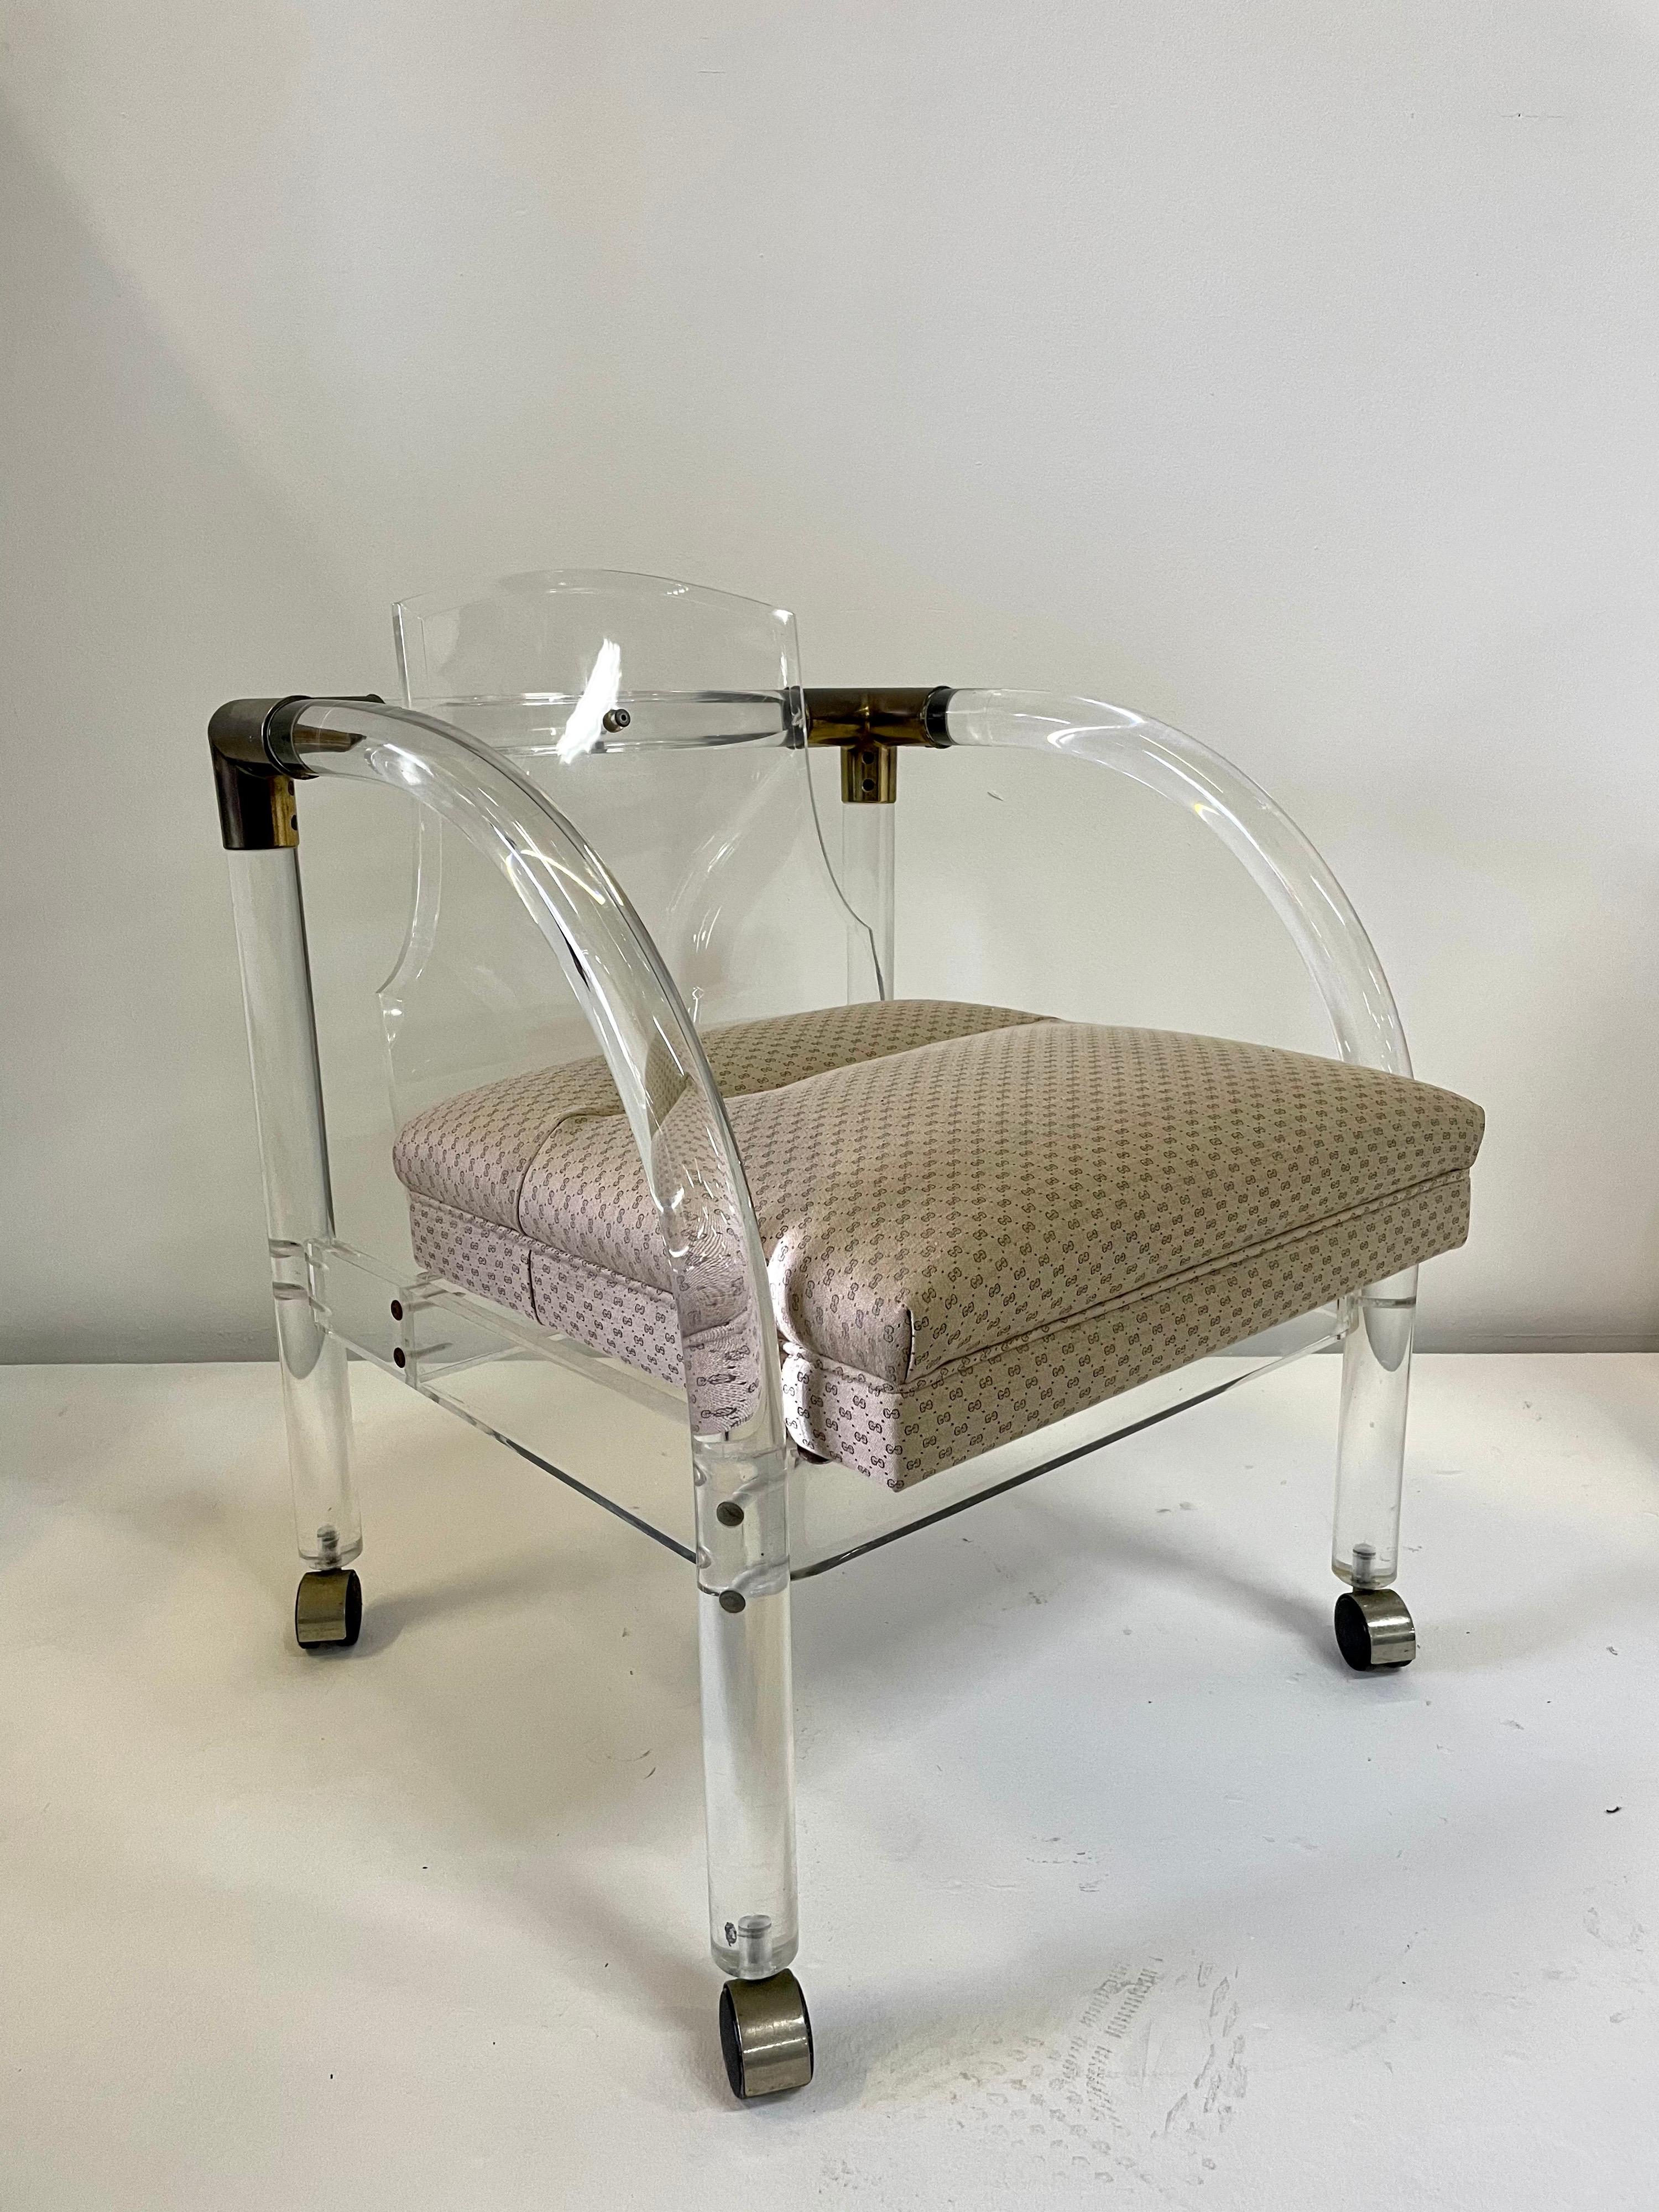 This is a great Lucite armchair with brass corner accents. The chair is on casters/wheels for easy movement. The fabric on the seat is a commercial grade vintage Gucci fabric.